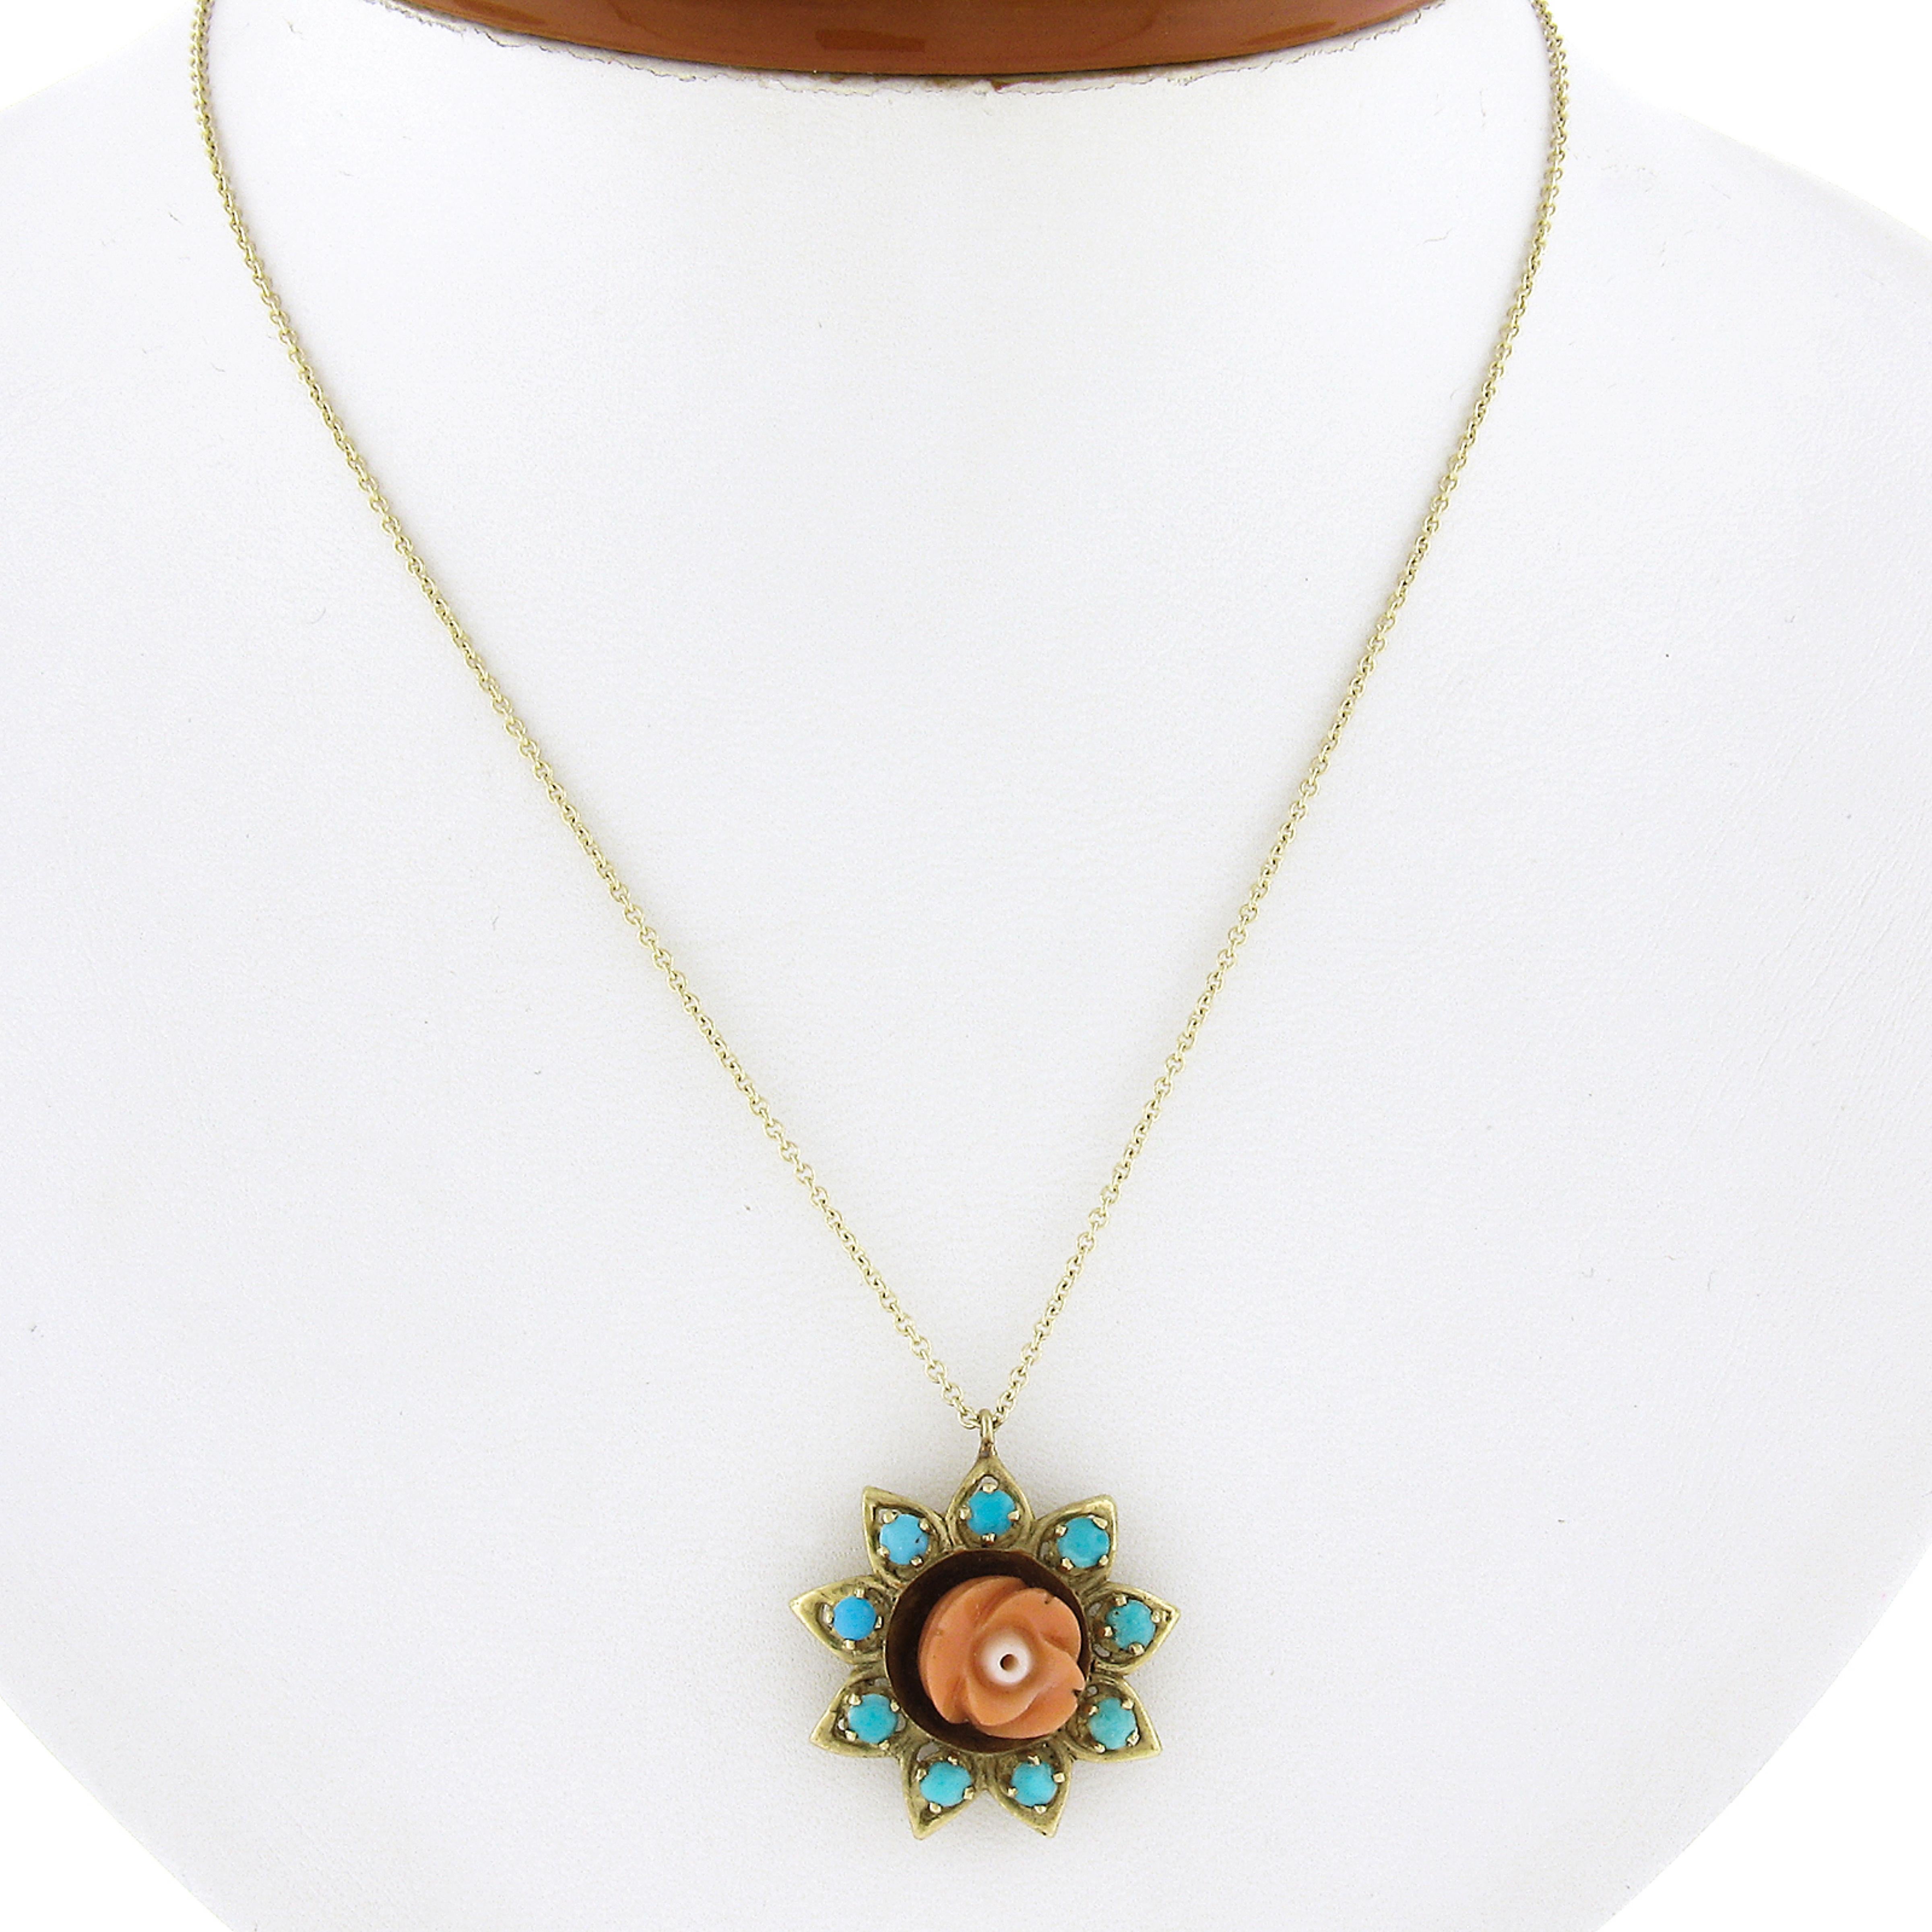 Here we have a gorgeous vintage flower pendant necklace crafted from solid 18k yellow gold featuring a carved coral rose flower. The coral shows a wonderful rich orange color throughout. The rose coral is surrounded with a 9 bead turquoises and